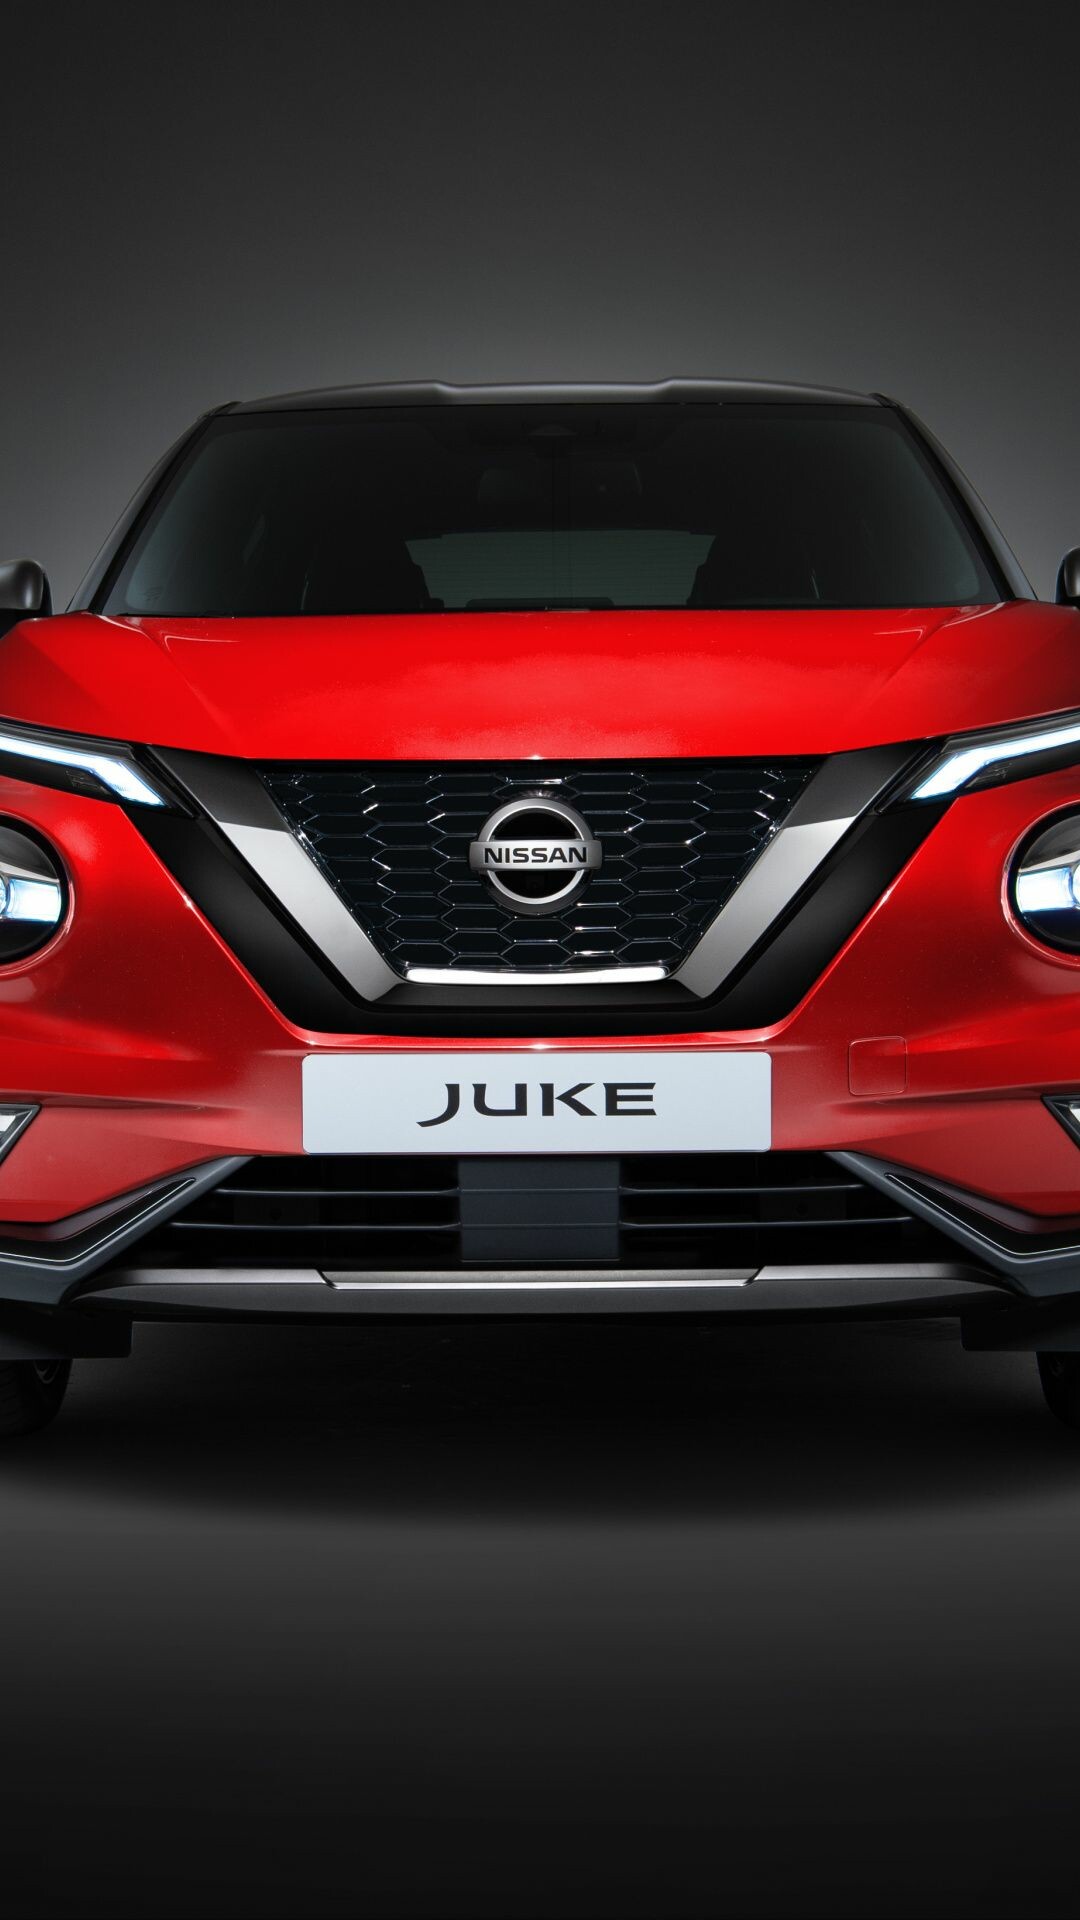 Nissan: Juke, A subcompact crossover SUV. 1080x1920 Full HD Background.